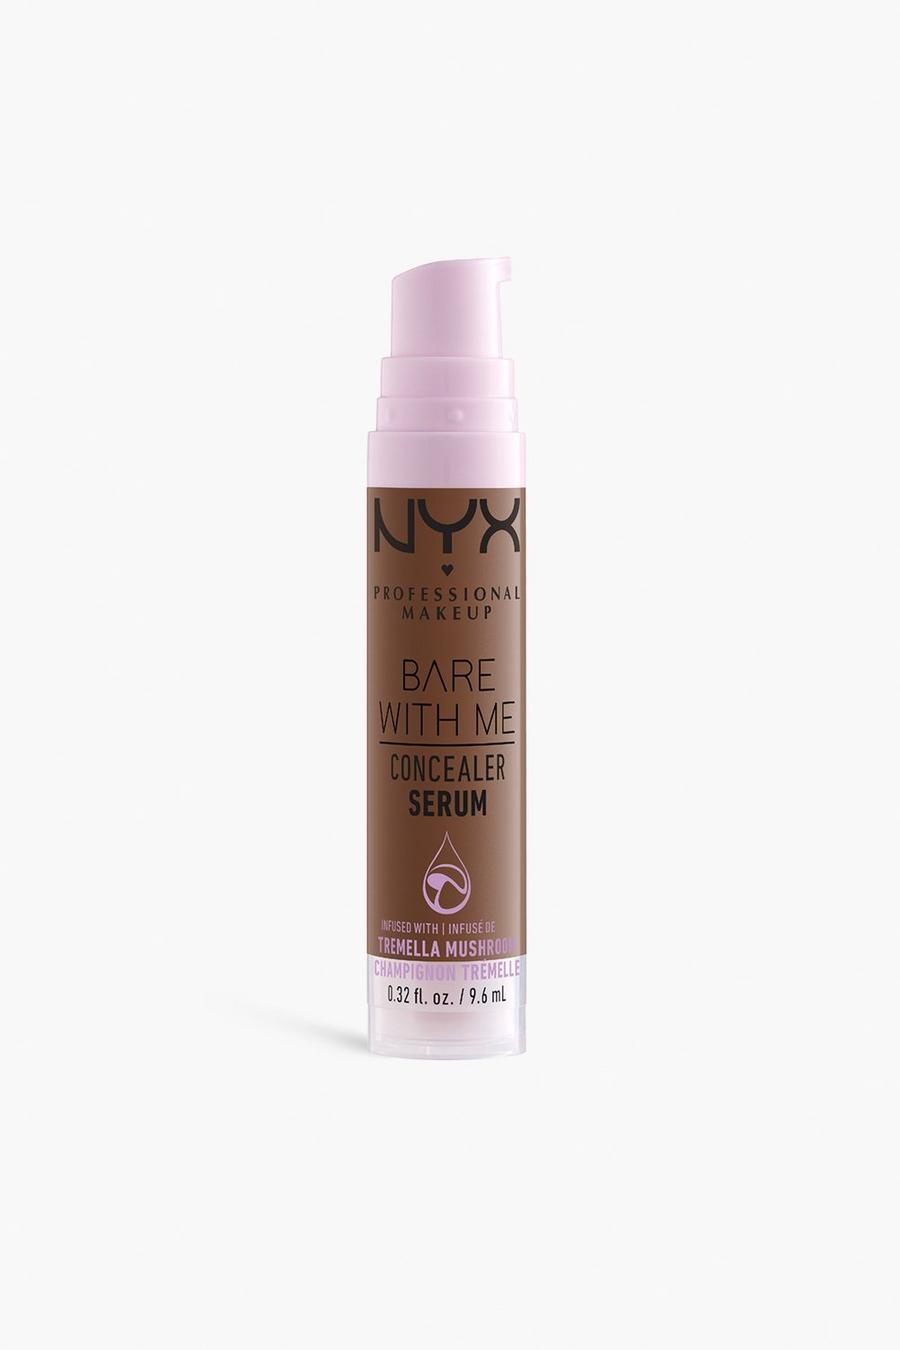 12 rich Nyx Professional Makeup Bare With Me Concealer Serum